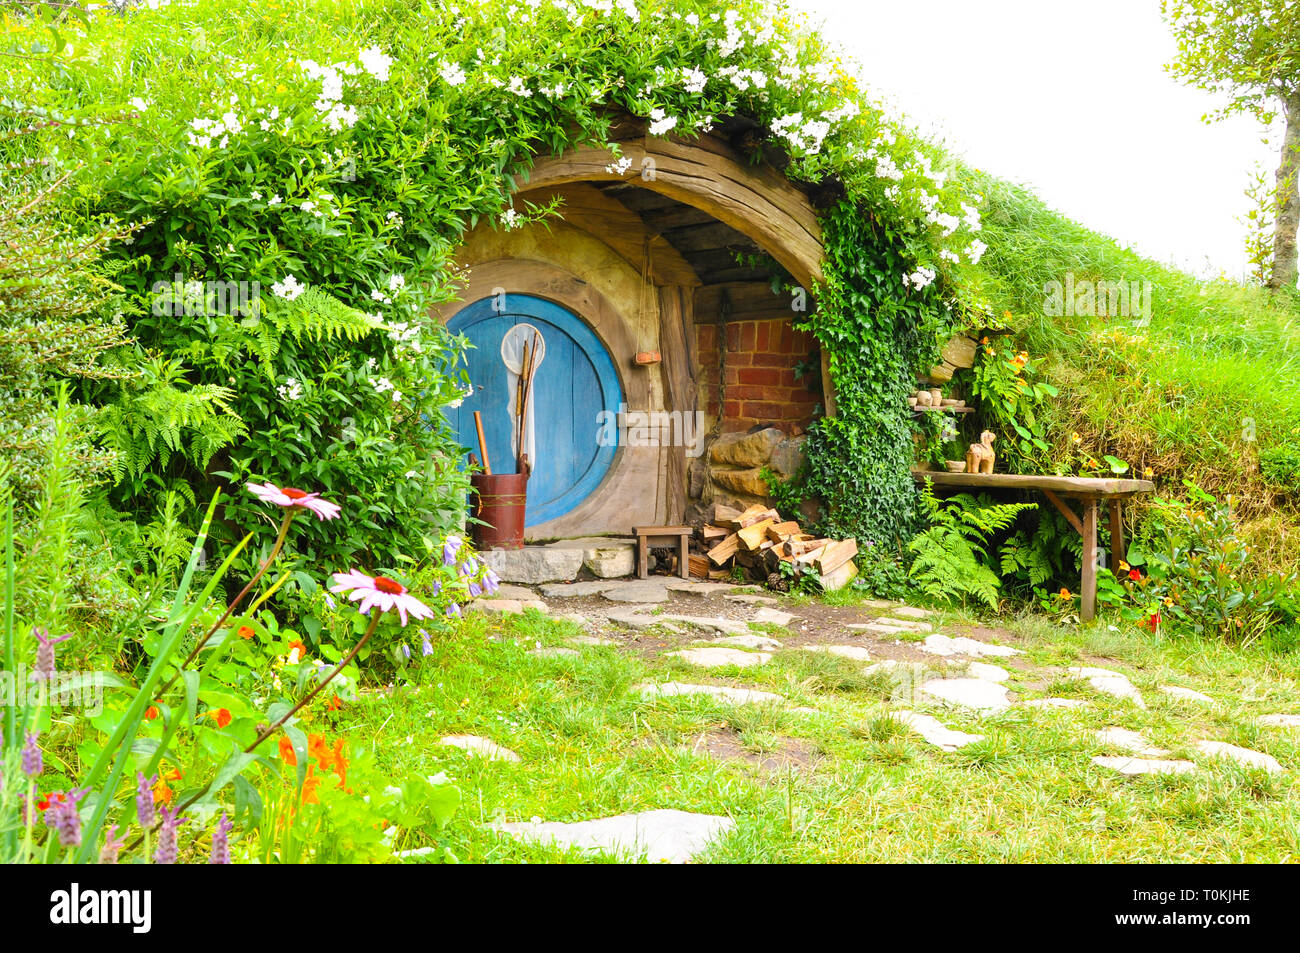 Hobbiton Movie Set - Location for the Lord of the Rings and The Hobbit films. Hobbit hole home. Visitor attraction in Waikato region New Zealand Stock Photo